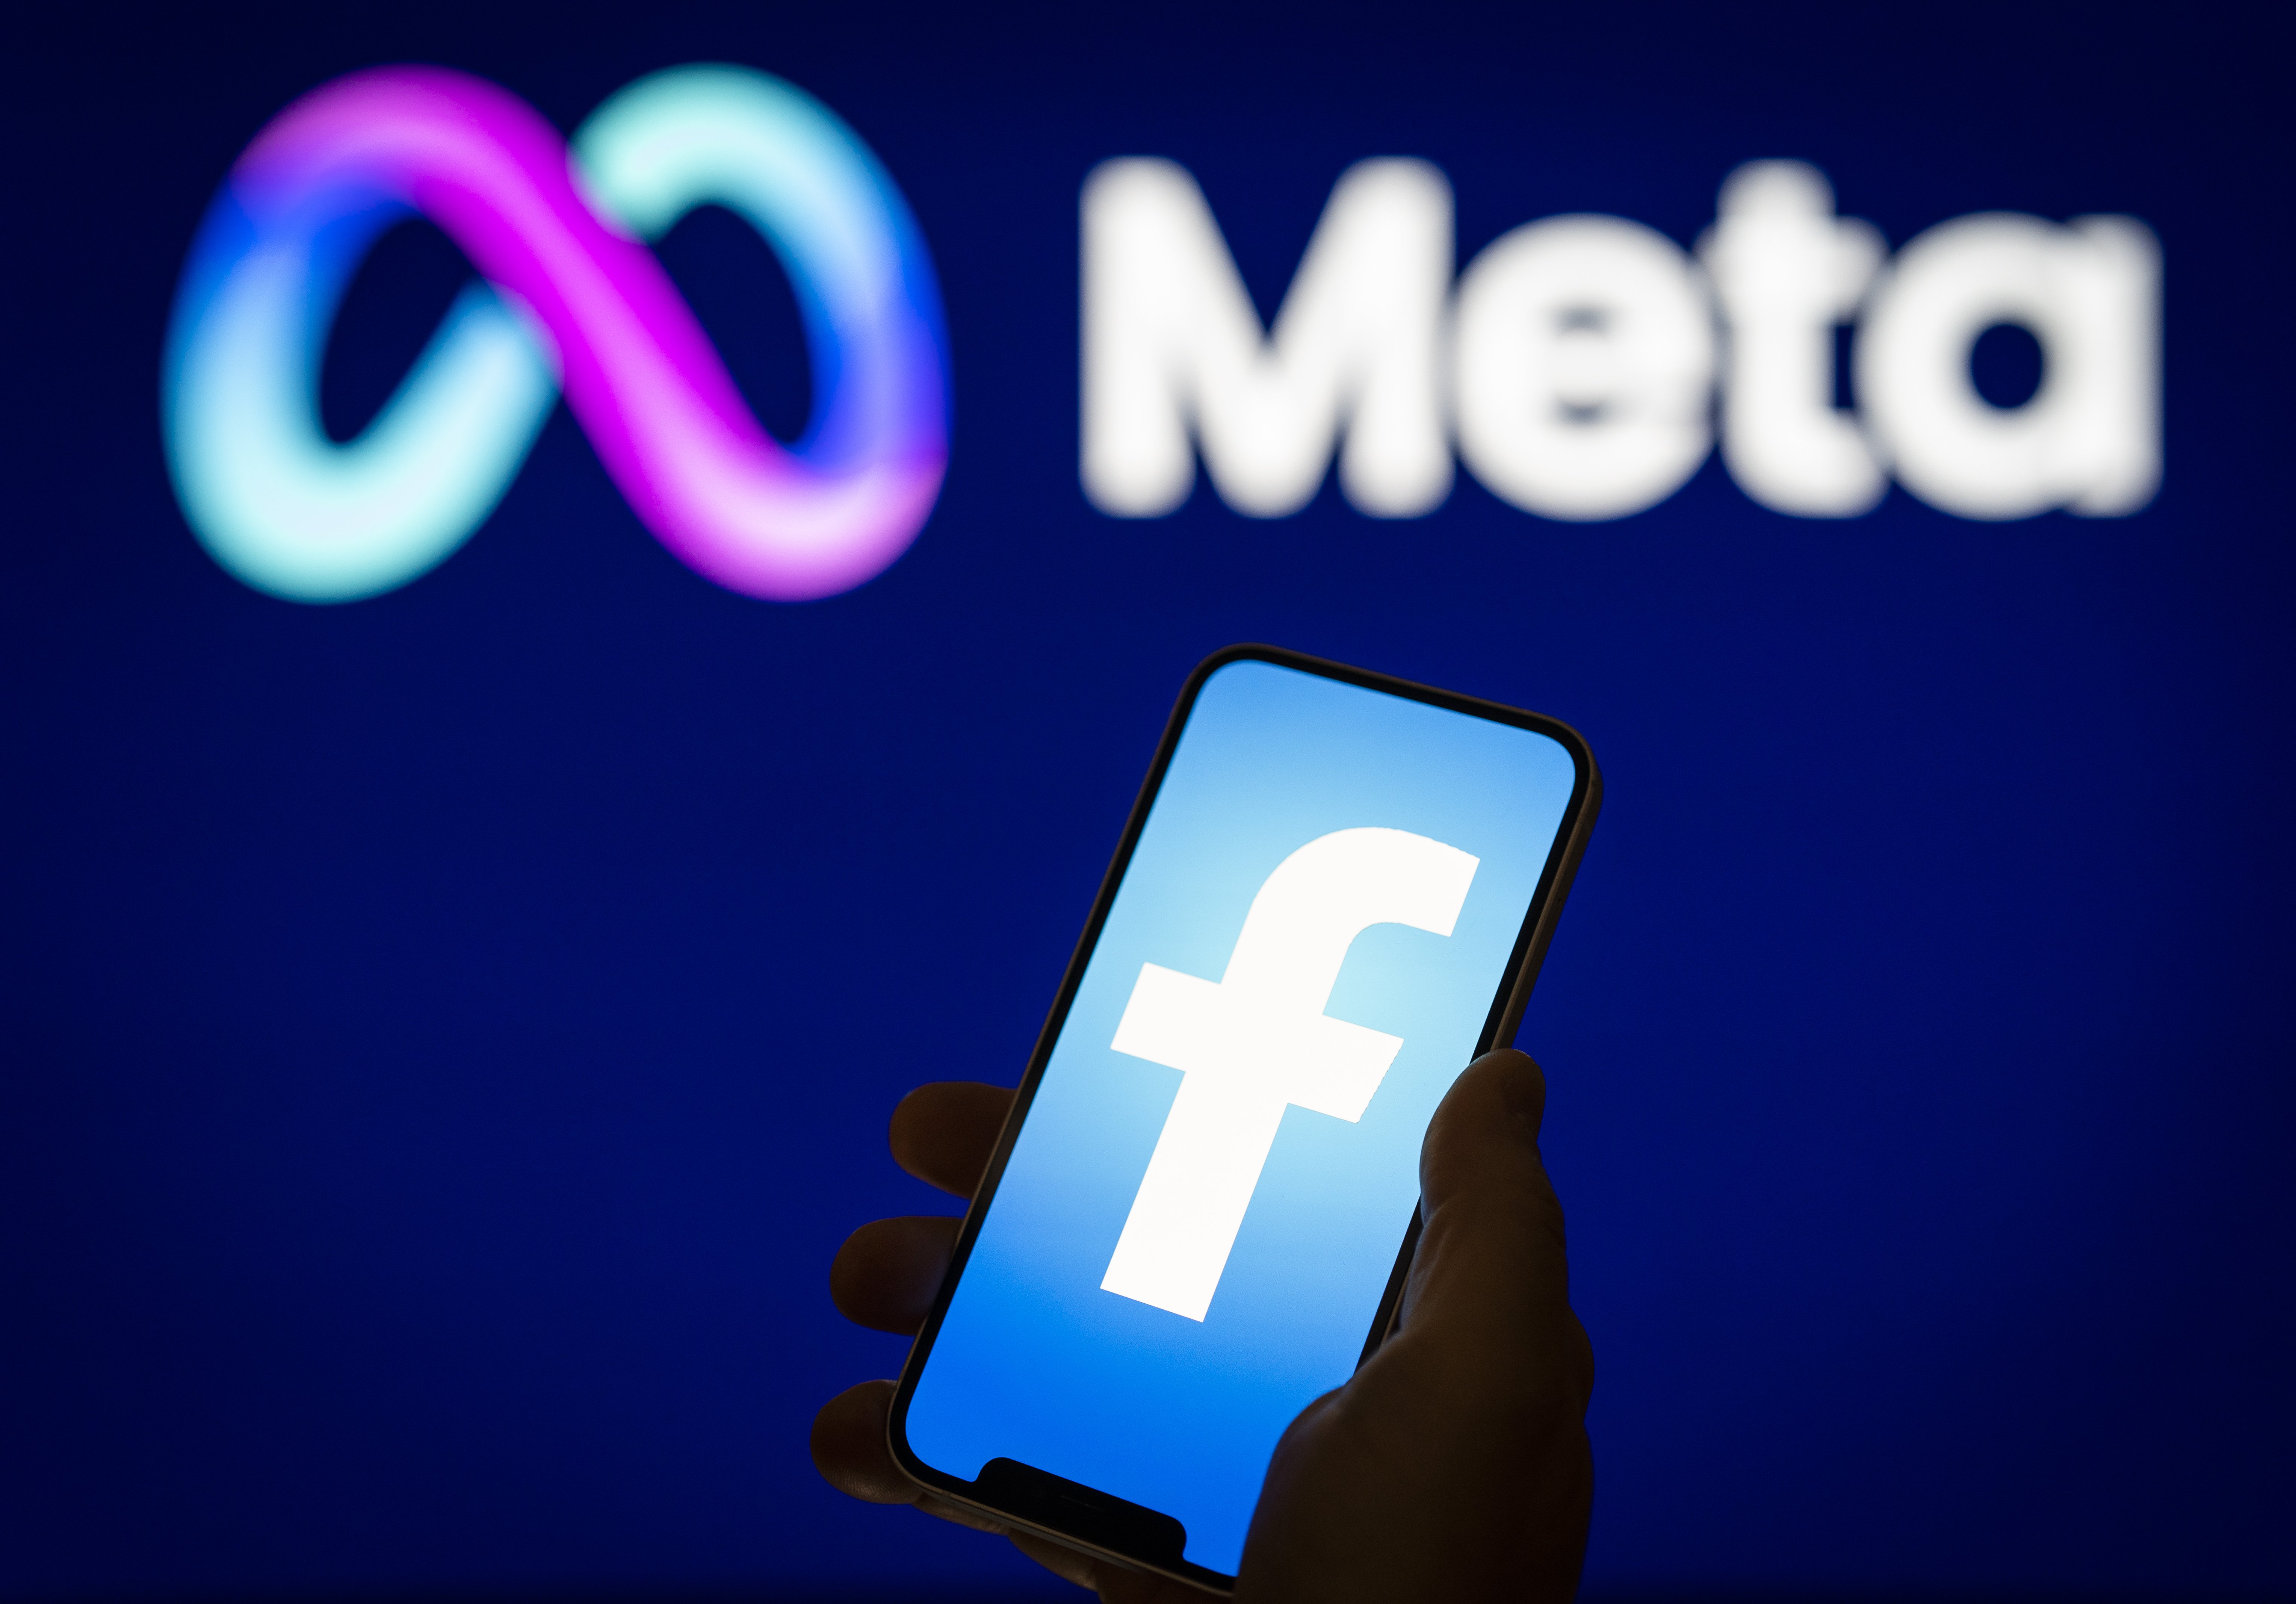 A Facebook logo is seen on a mobile device screen with a Meta logo in the background in this photo illustration on 31 May, 2023 in Warsaw, Poland.